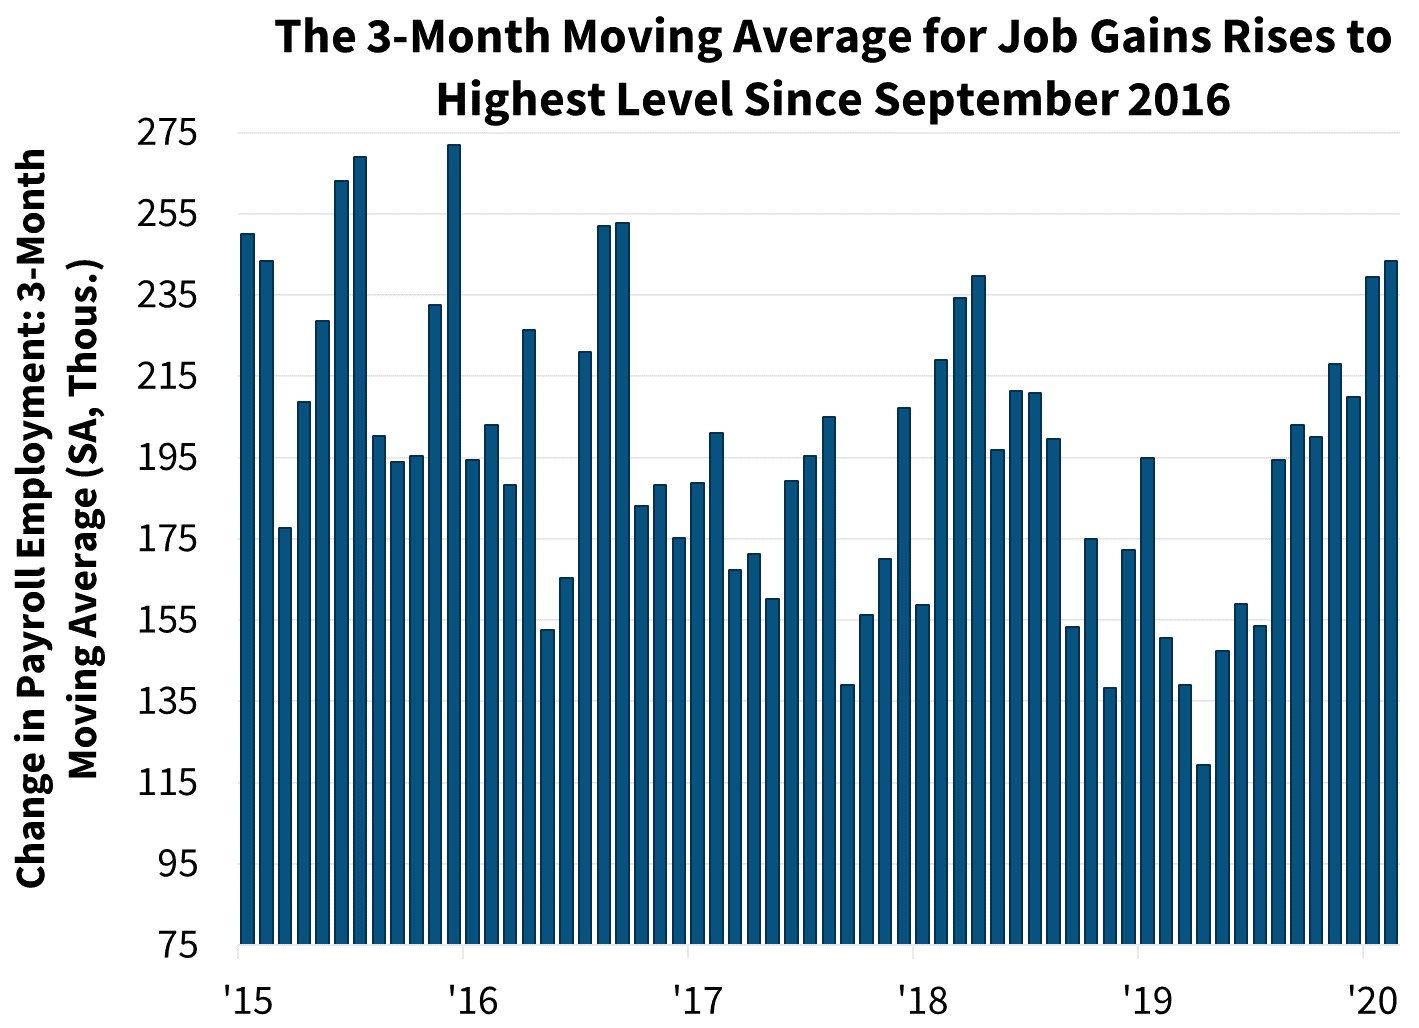 The 3-Month Average for Job Gains Rises to Highest Level Since September 2016